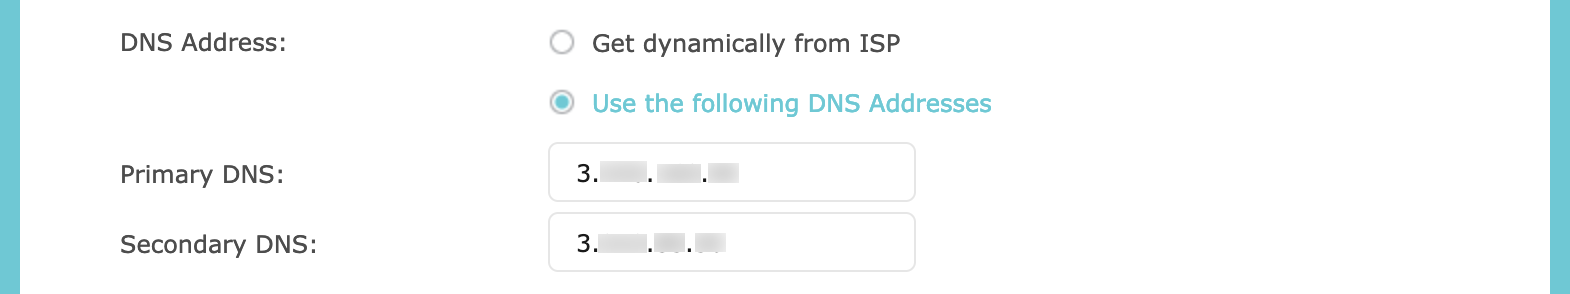 dns example.png